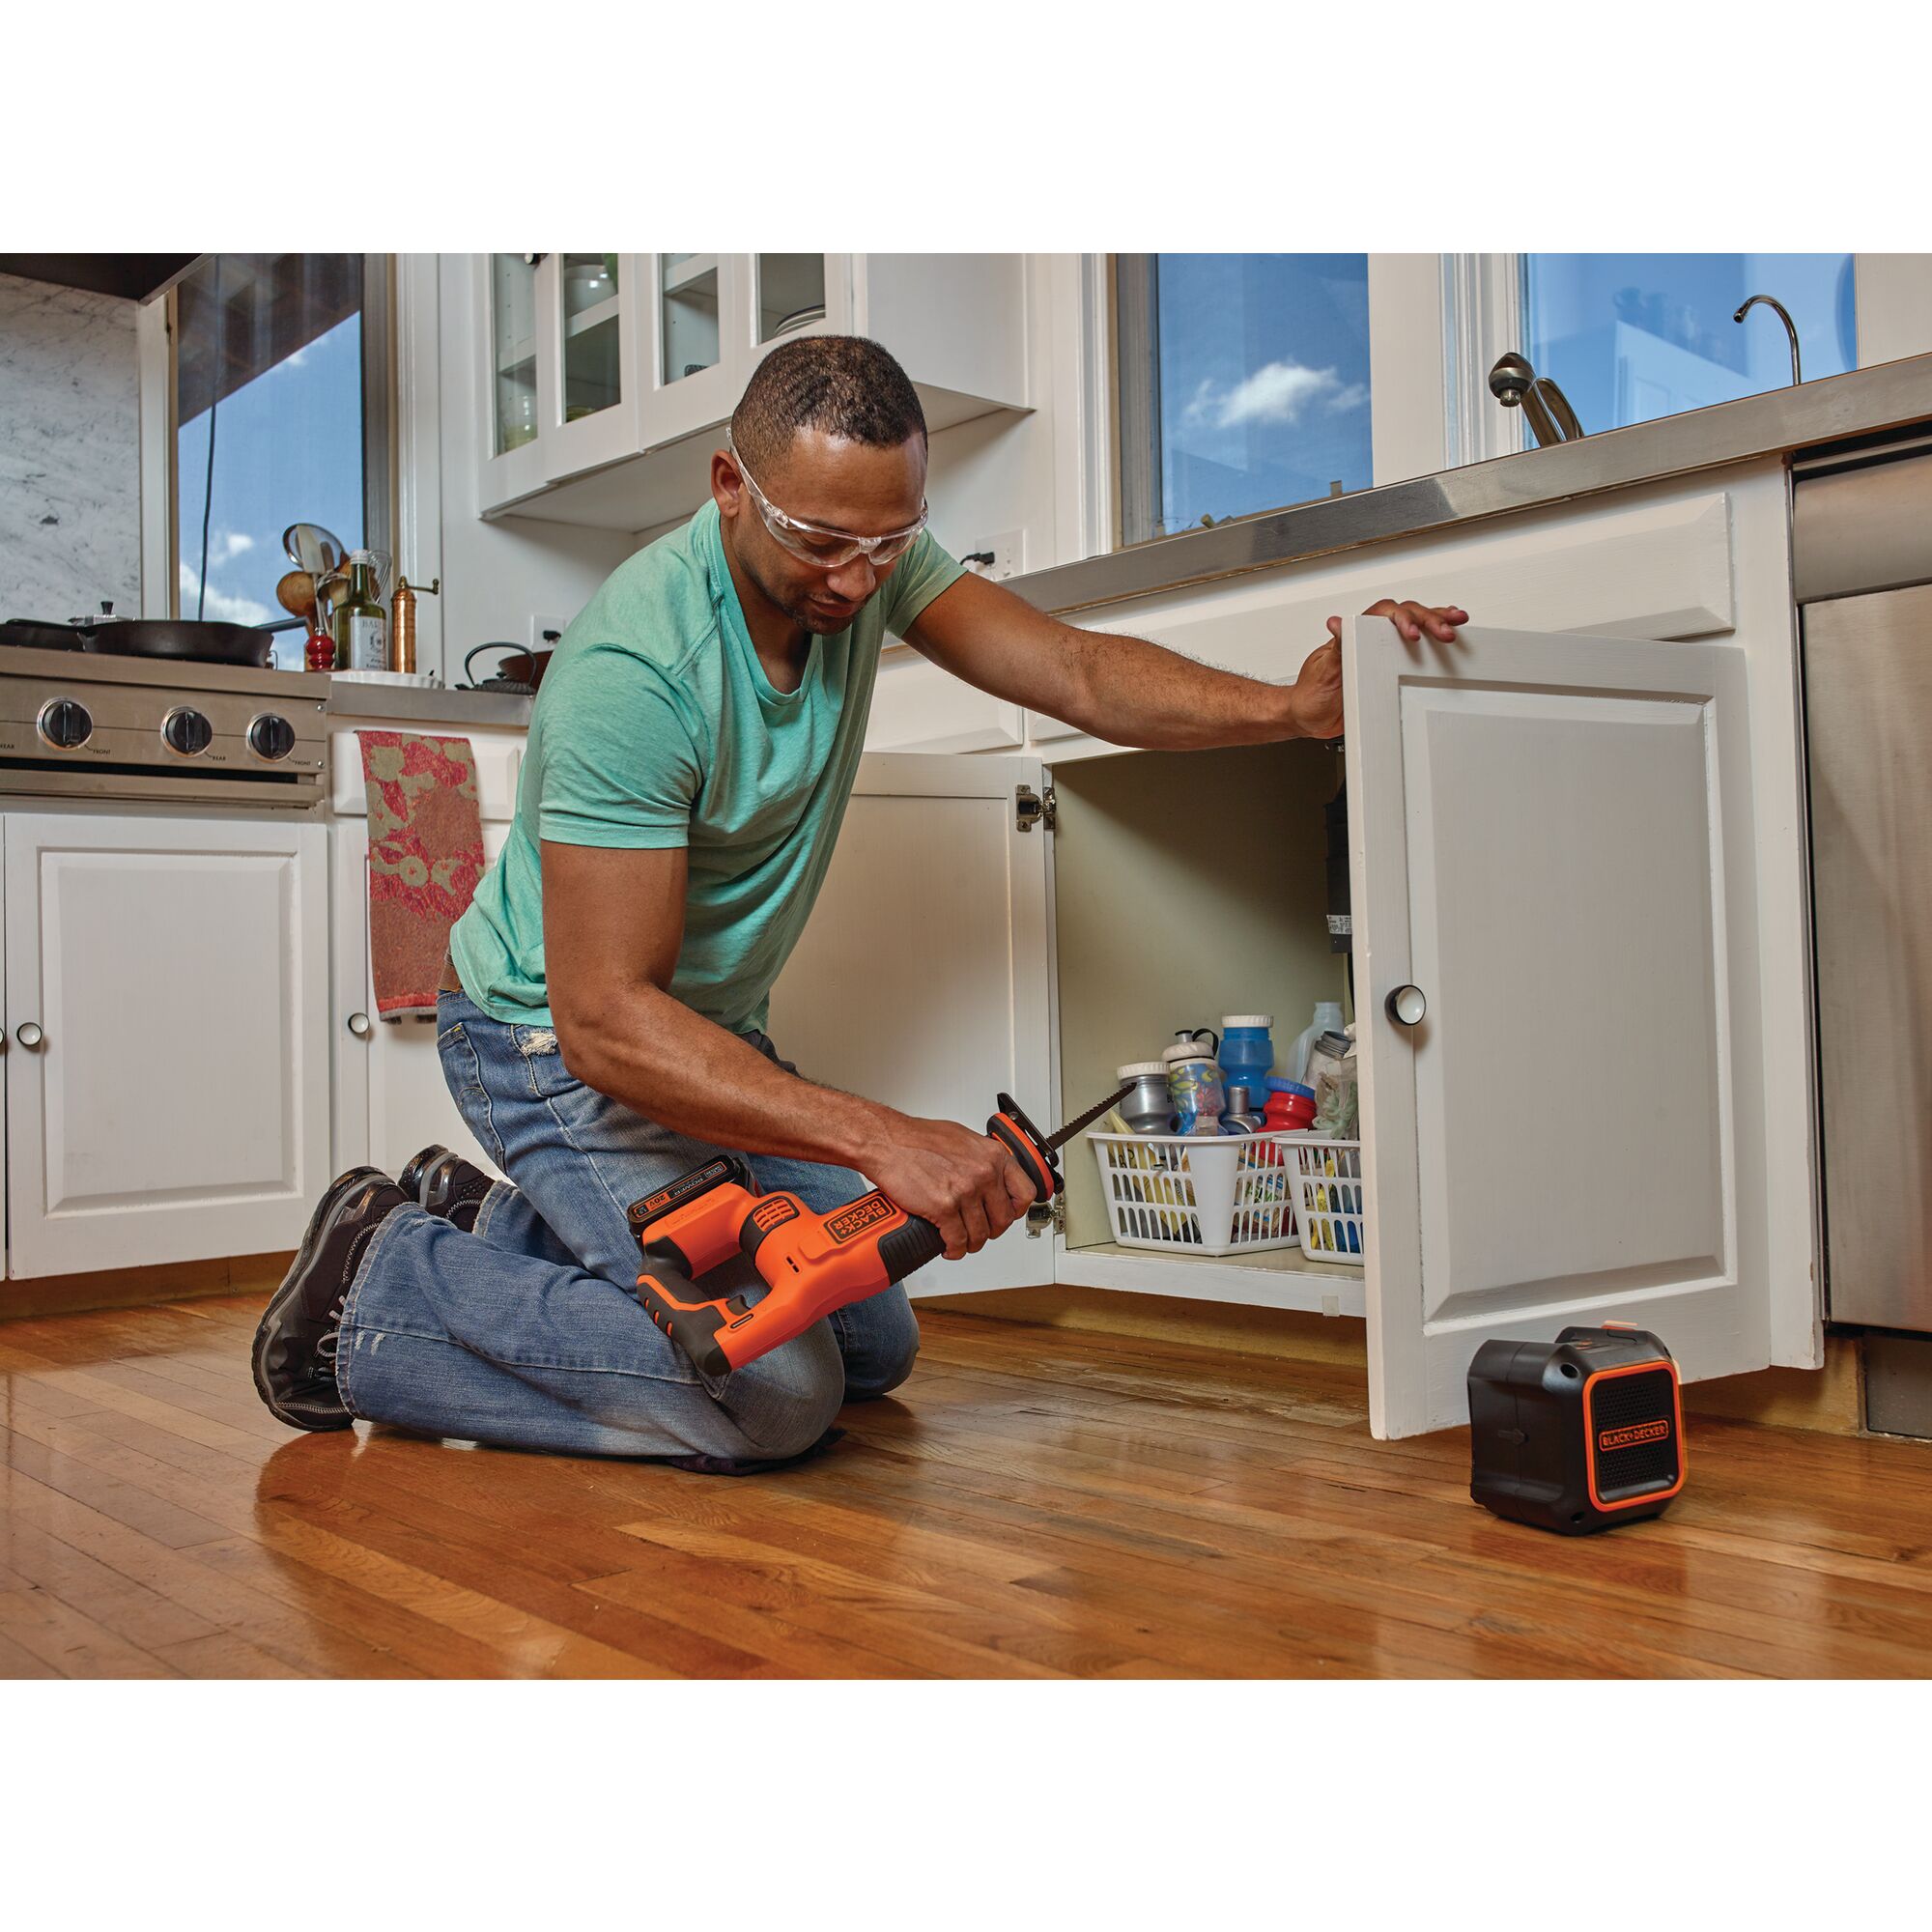 Cordless Reciprocating Saw Kit being used by person.